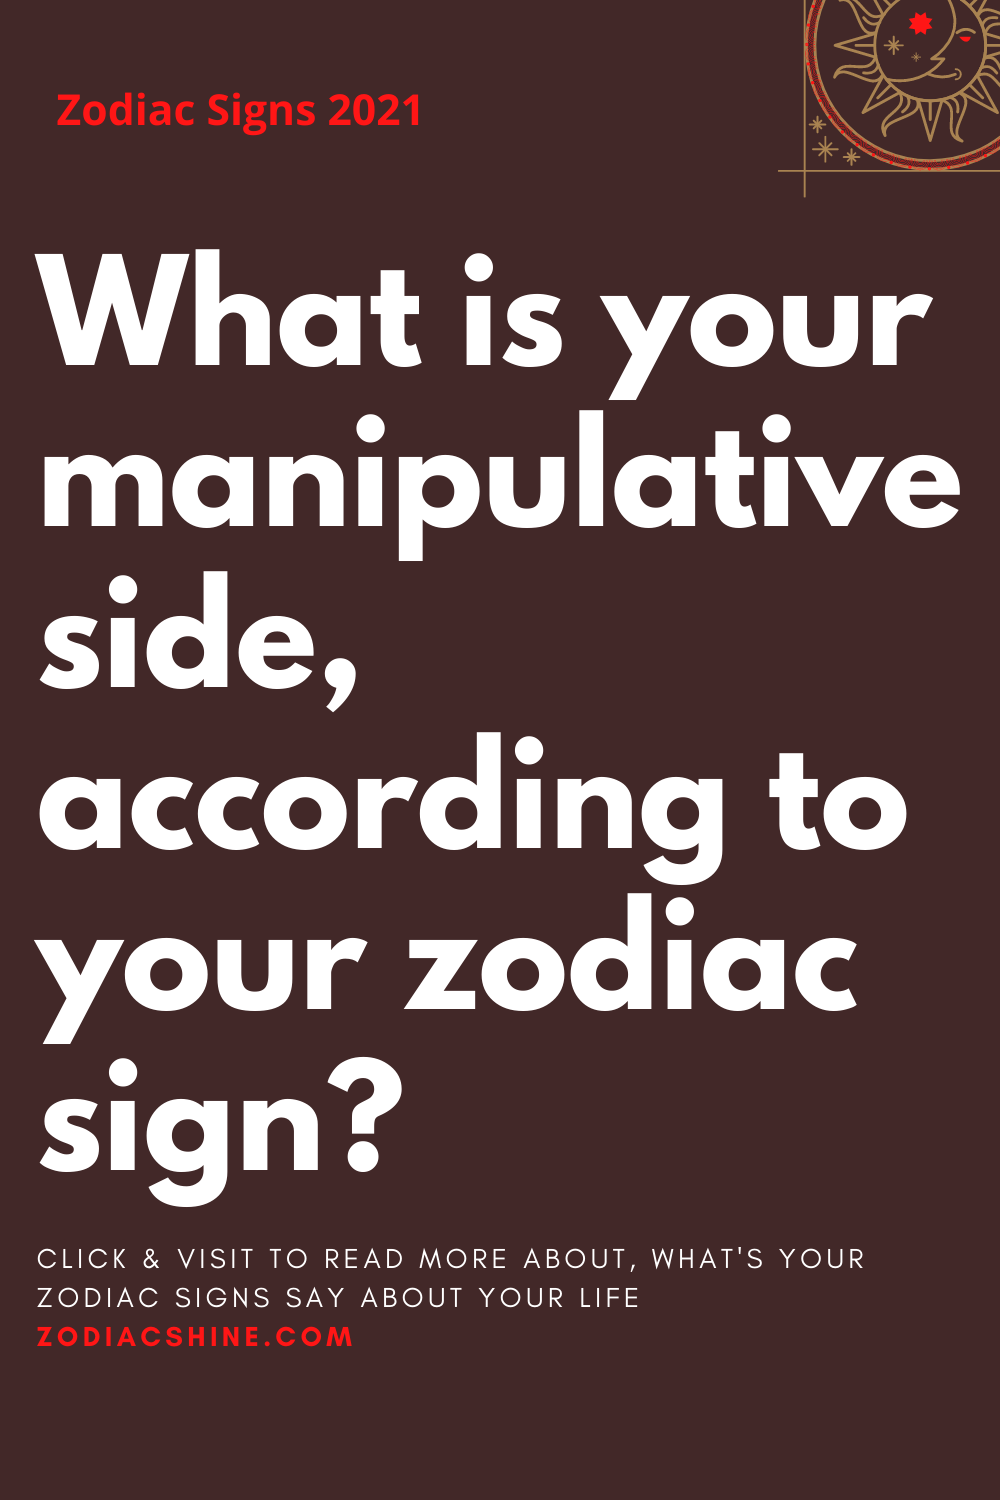 What is your manipulative side, according to your zodiac sign?